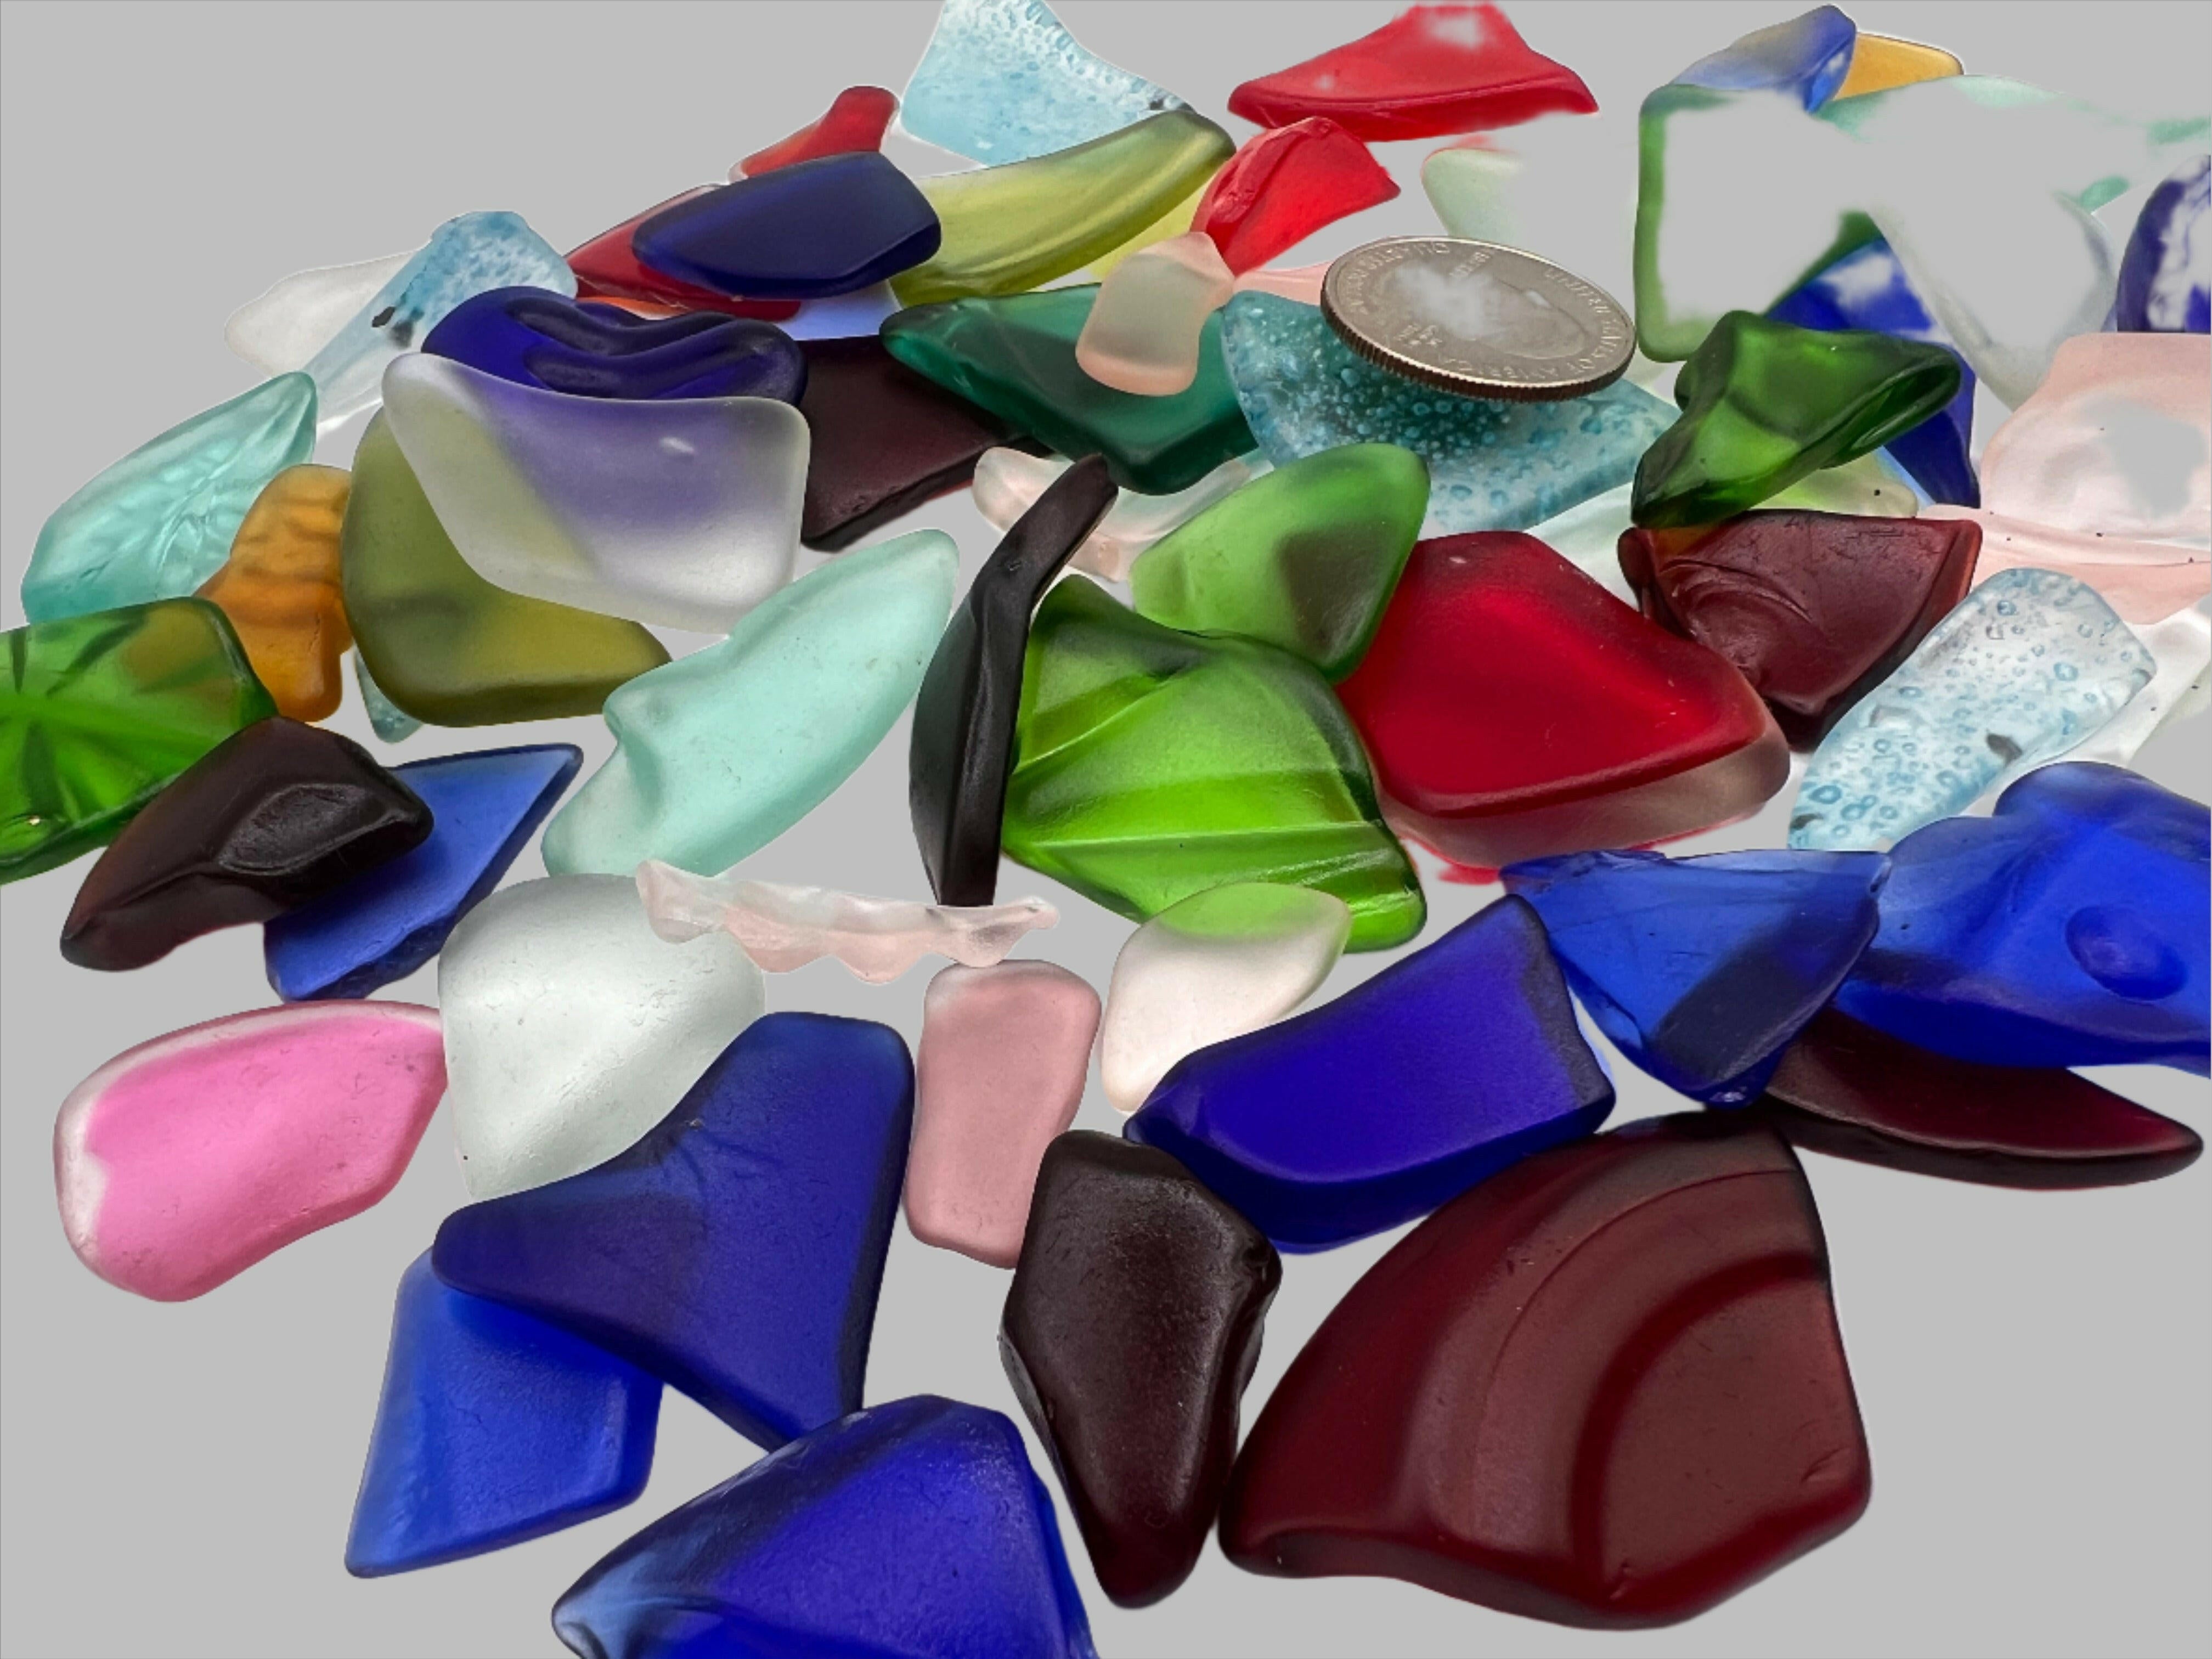 Bec Sue Jewelry Shop tumbled glass Vibrant Mix Glass Pieces: Medium-Sized Recycled Glass in Assorted Colors Tags